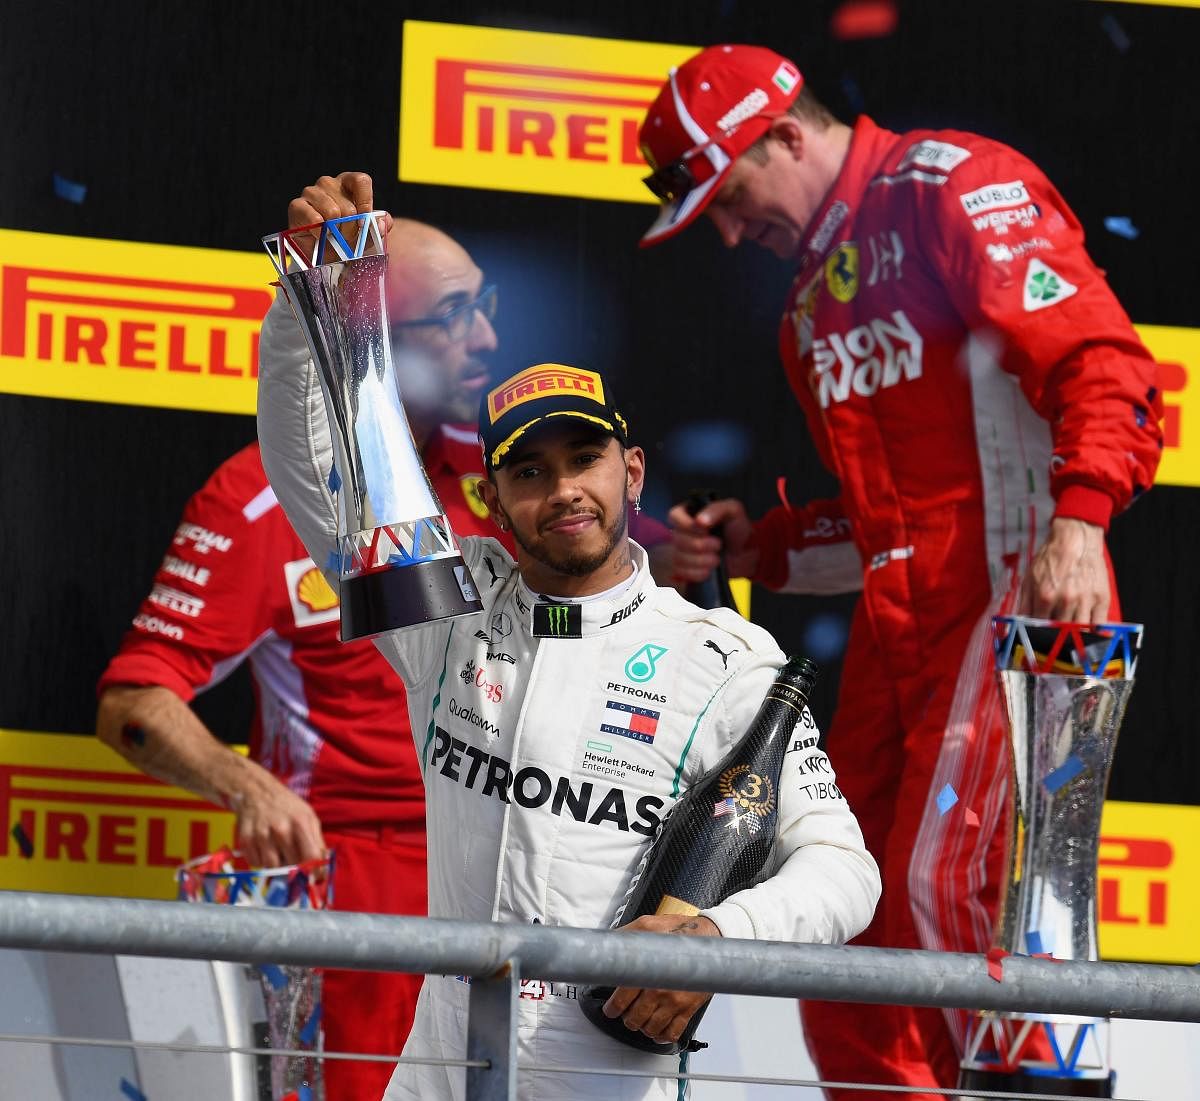 Third placed Lewis Hamilton of Mercedes celebrates on the podium after the United States Grand Prix. AFP